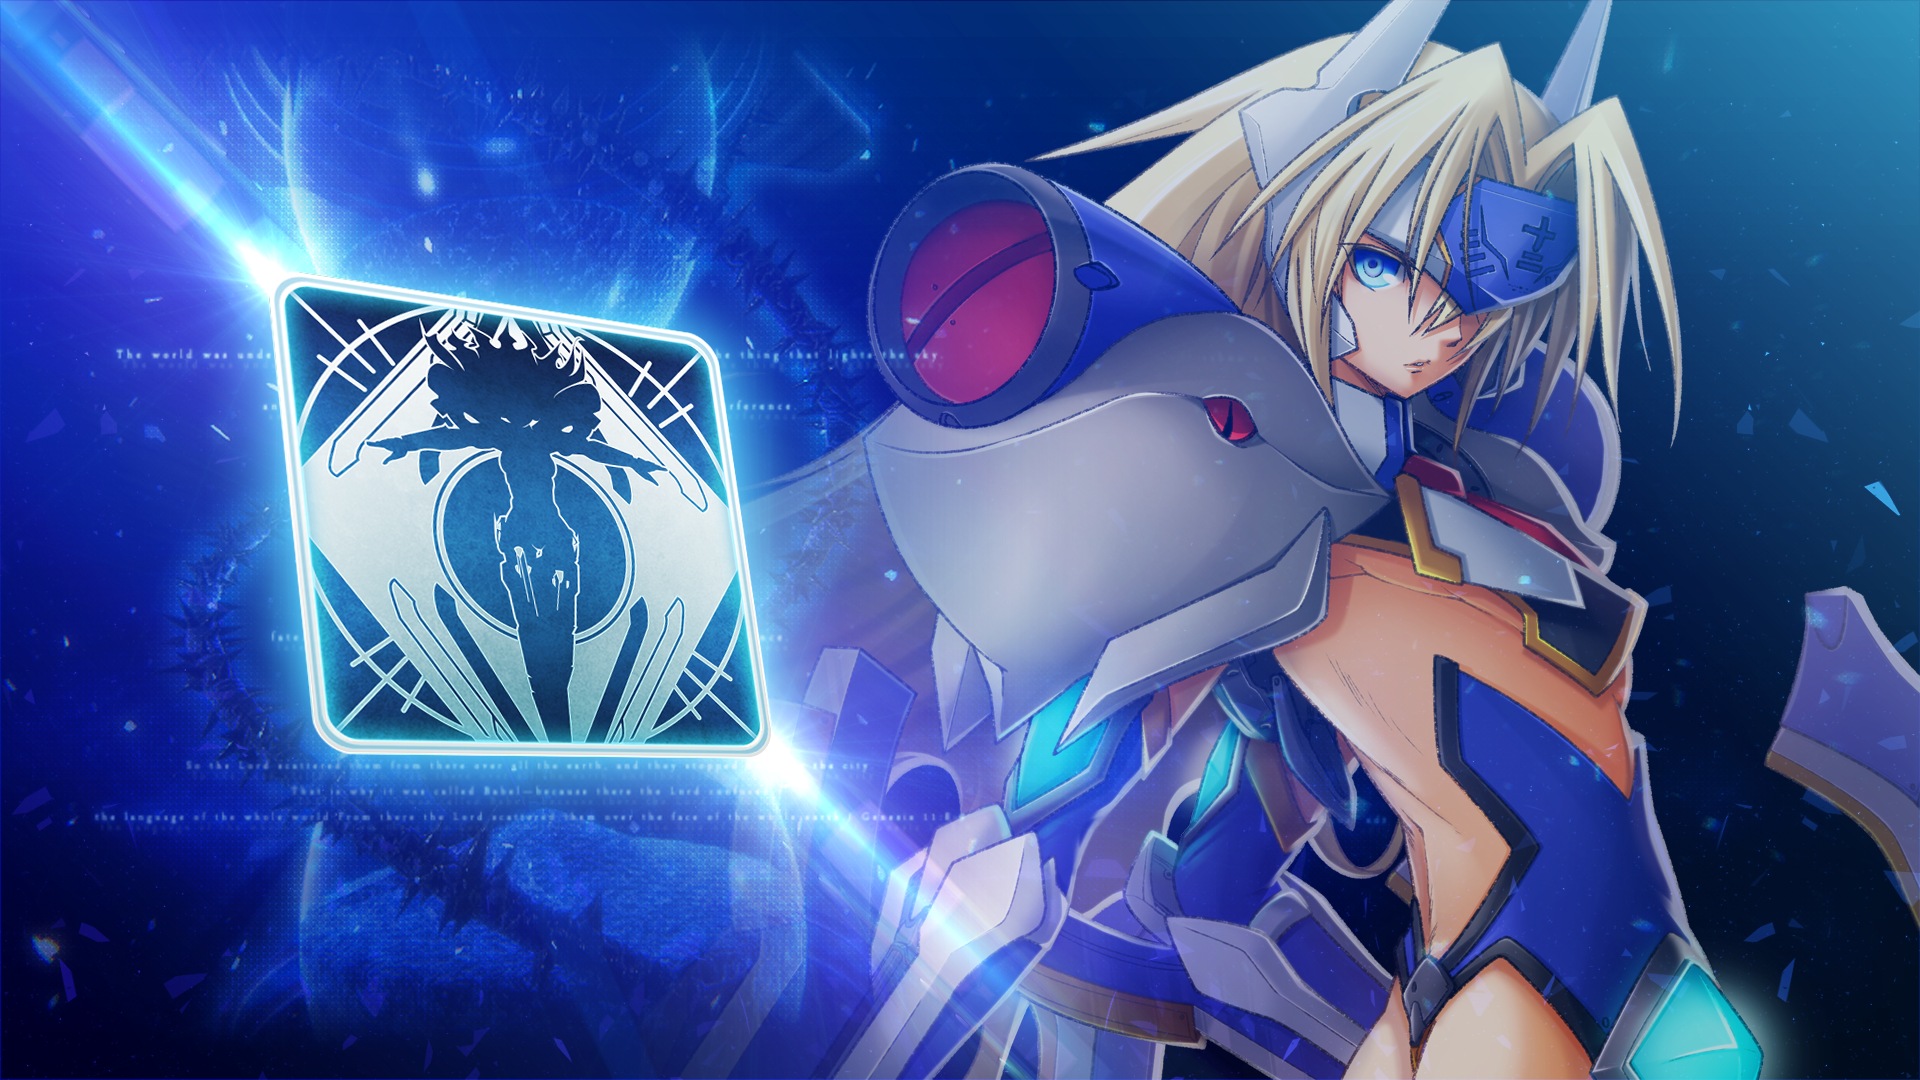 Mu 12 Blazblue Continuum Shift Wallpaper Hd Games 4k Wallpapers Images Photos And Background